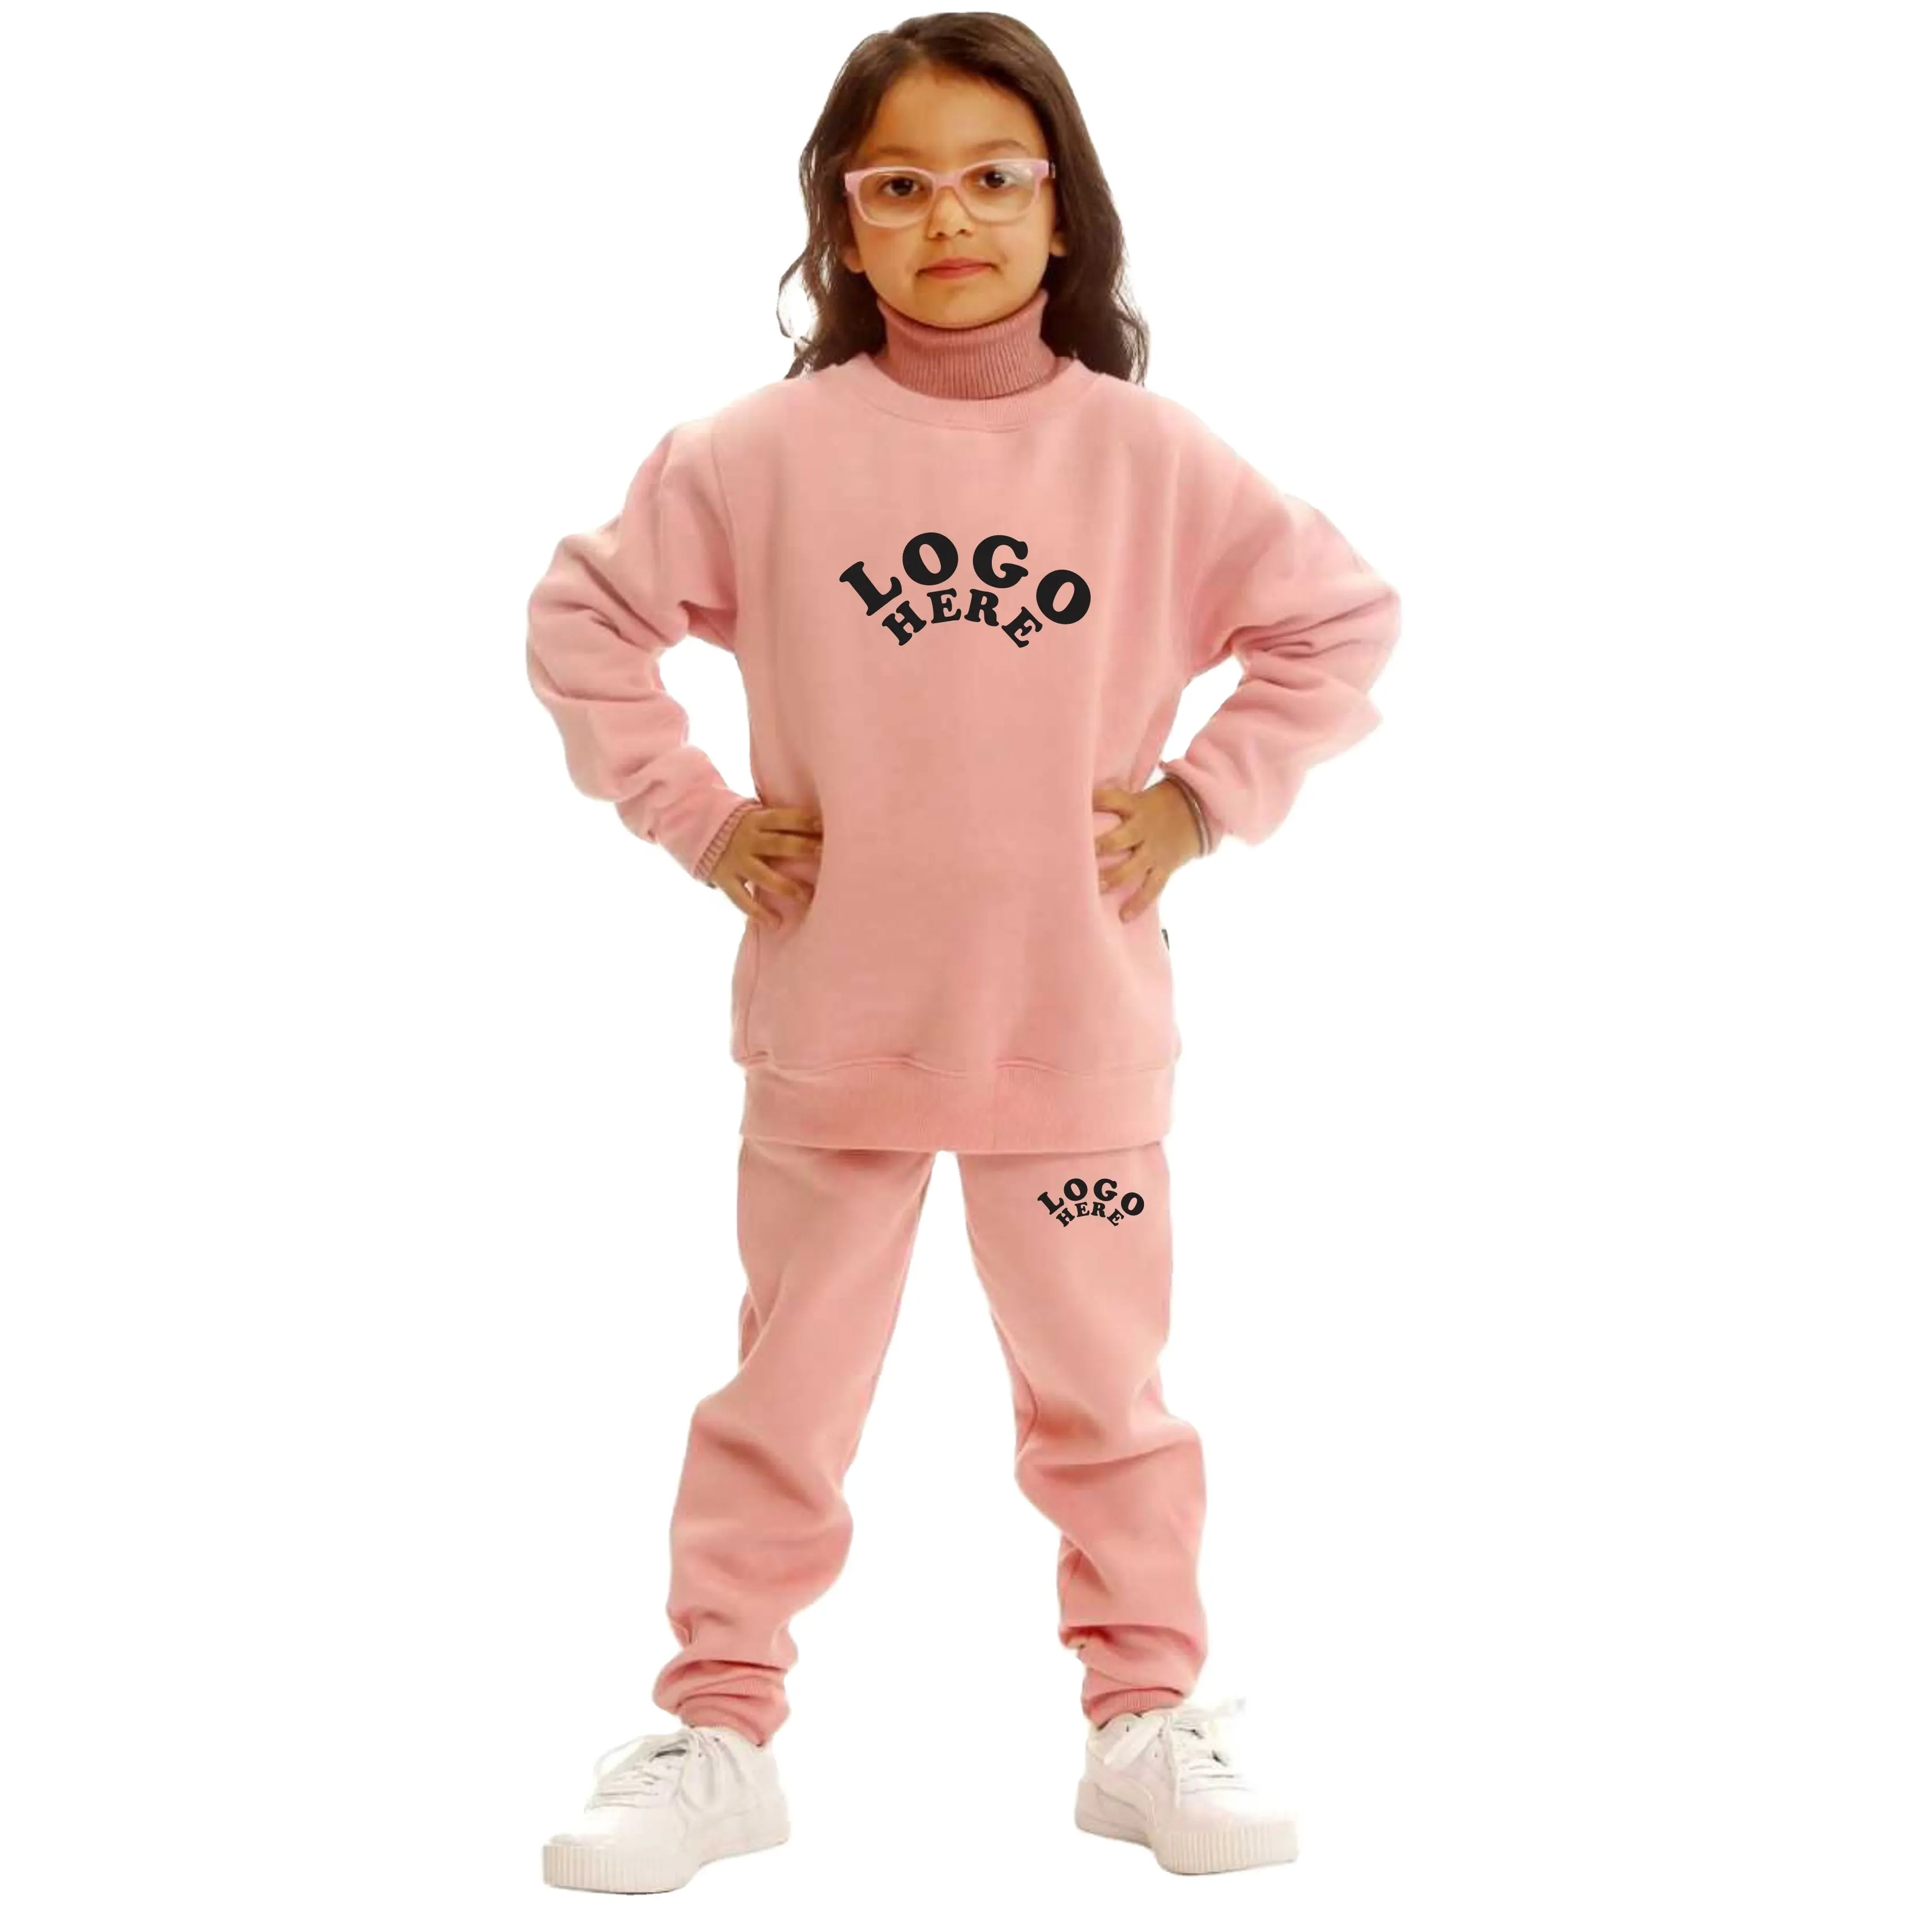 2022 Kids Boys And Girls Children Tracksuit Sets Clothing Two Piece Hoodie Pants Sweatsuits Set For Sale In Low Price For Winter